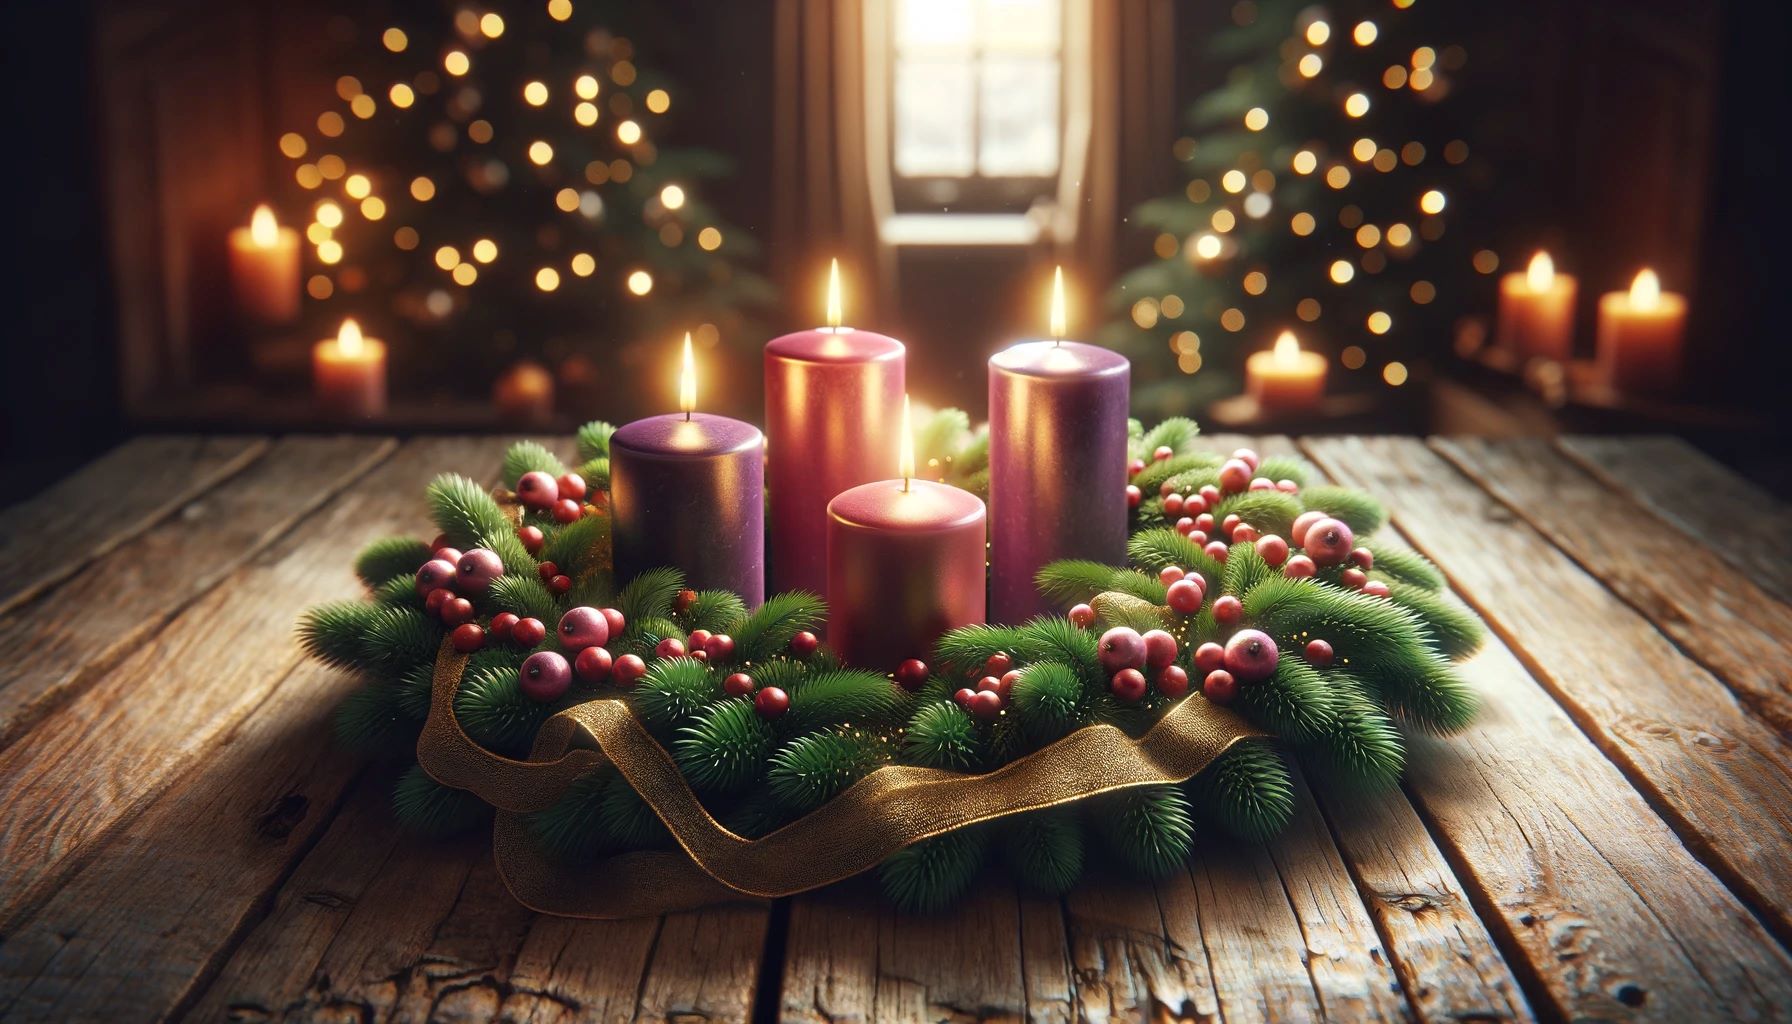 What Are The Color Of The Advent Candles